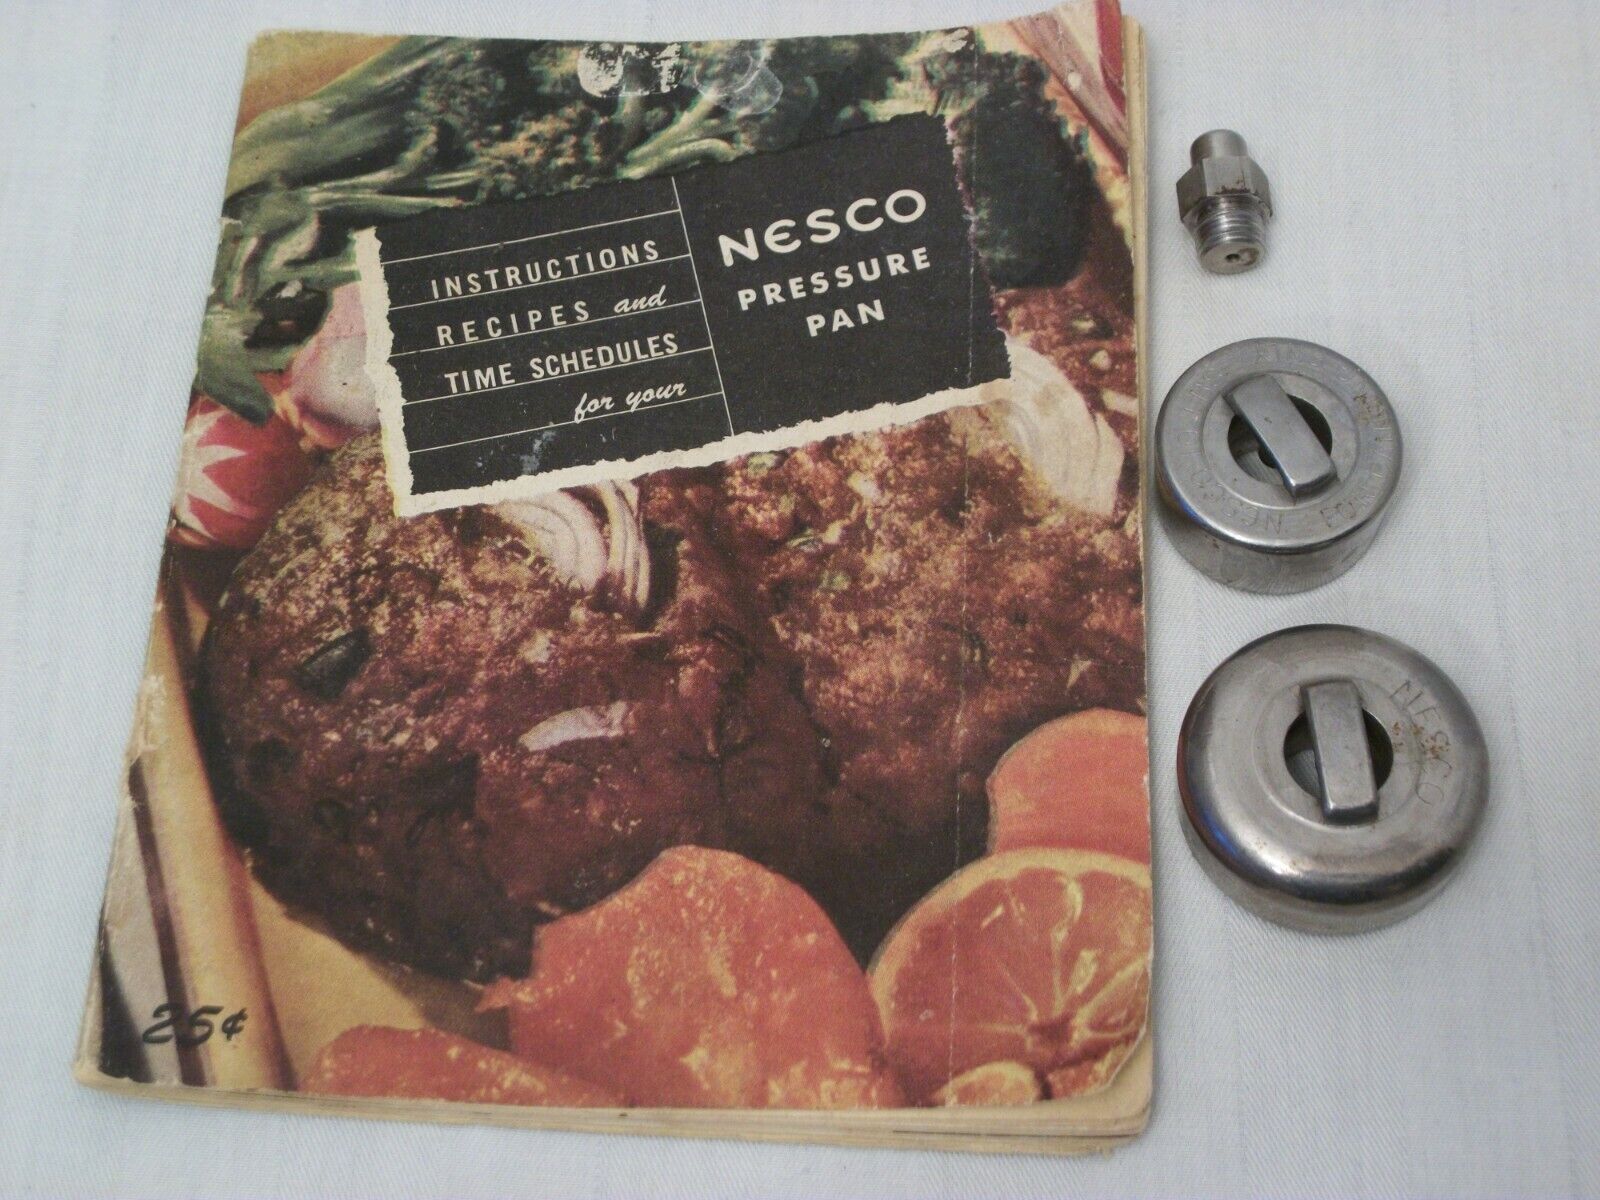 NESCO New Orleans Mall VENT Gifts TUBE+ 2 PRESSURE CONTROLS + PRES INSTRUCTION BOOK FOR